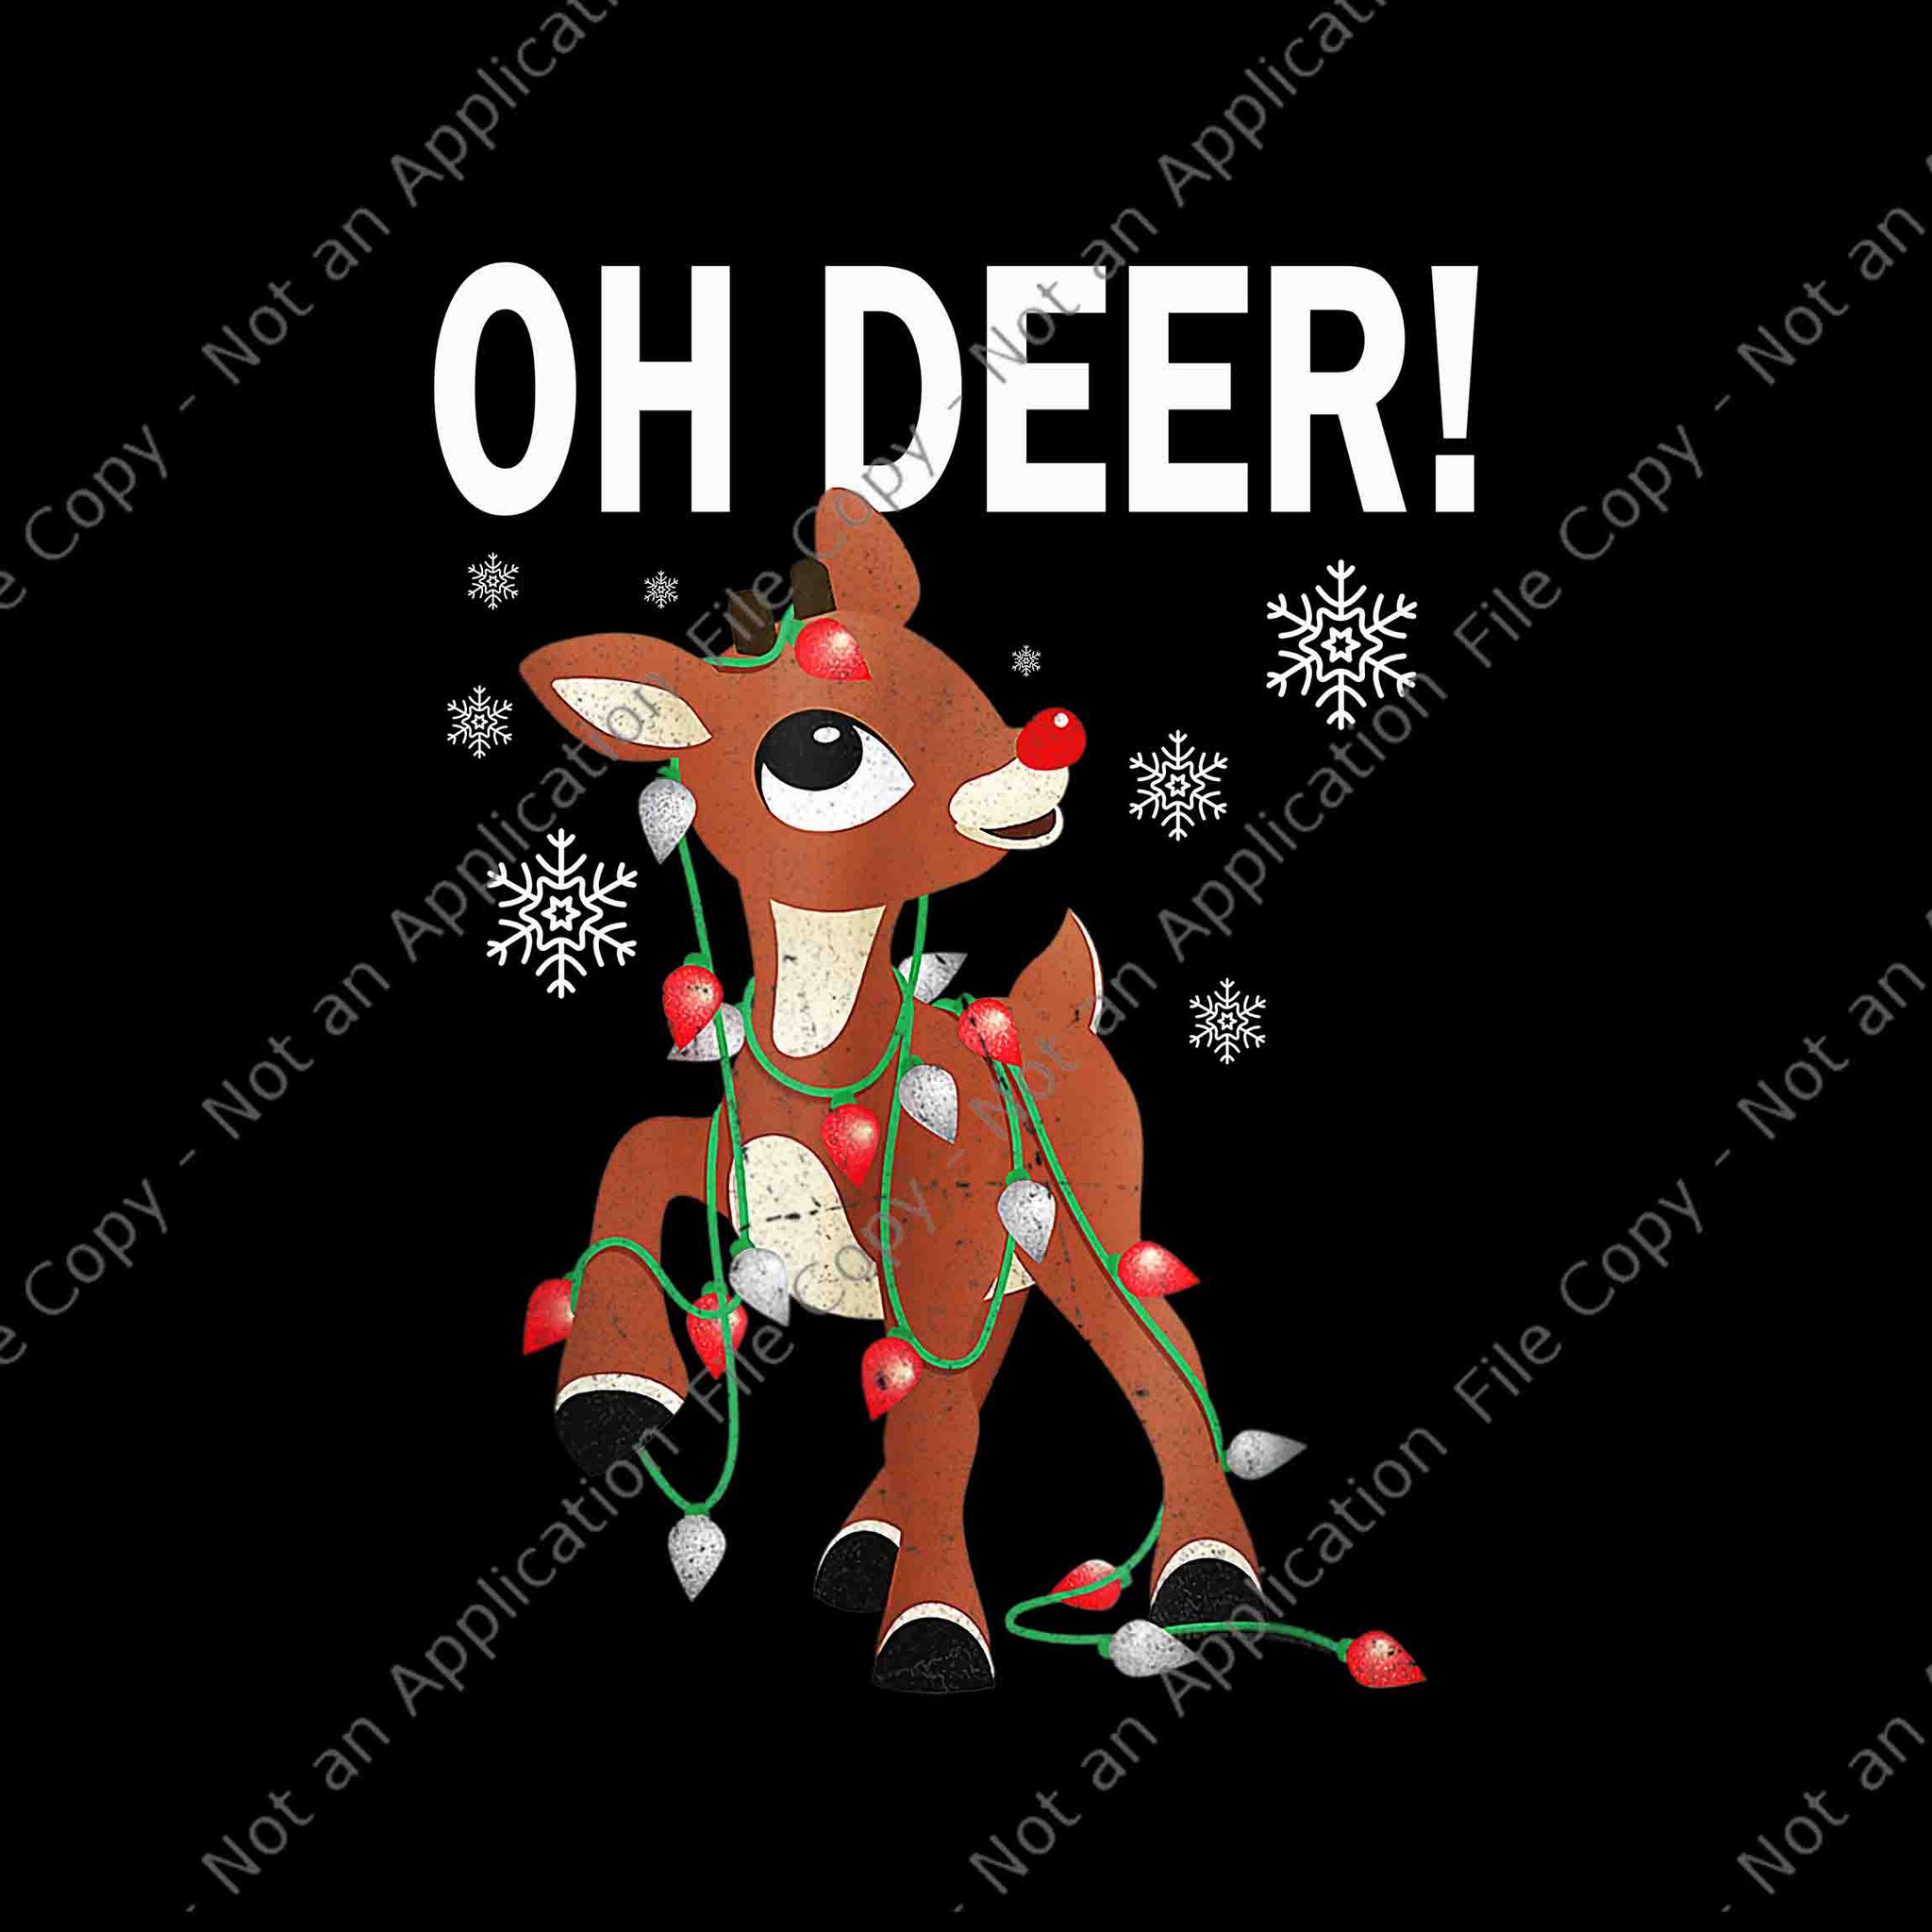 Rudolph The Red Nosed Reindeer Christmas Png, Special Oh Deer Christmas Png, Reindeer Christmas Png, Reindeer Lights Xmas Png